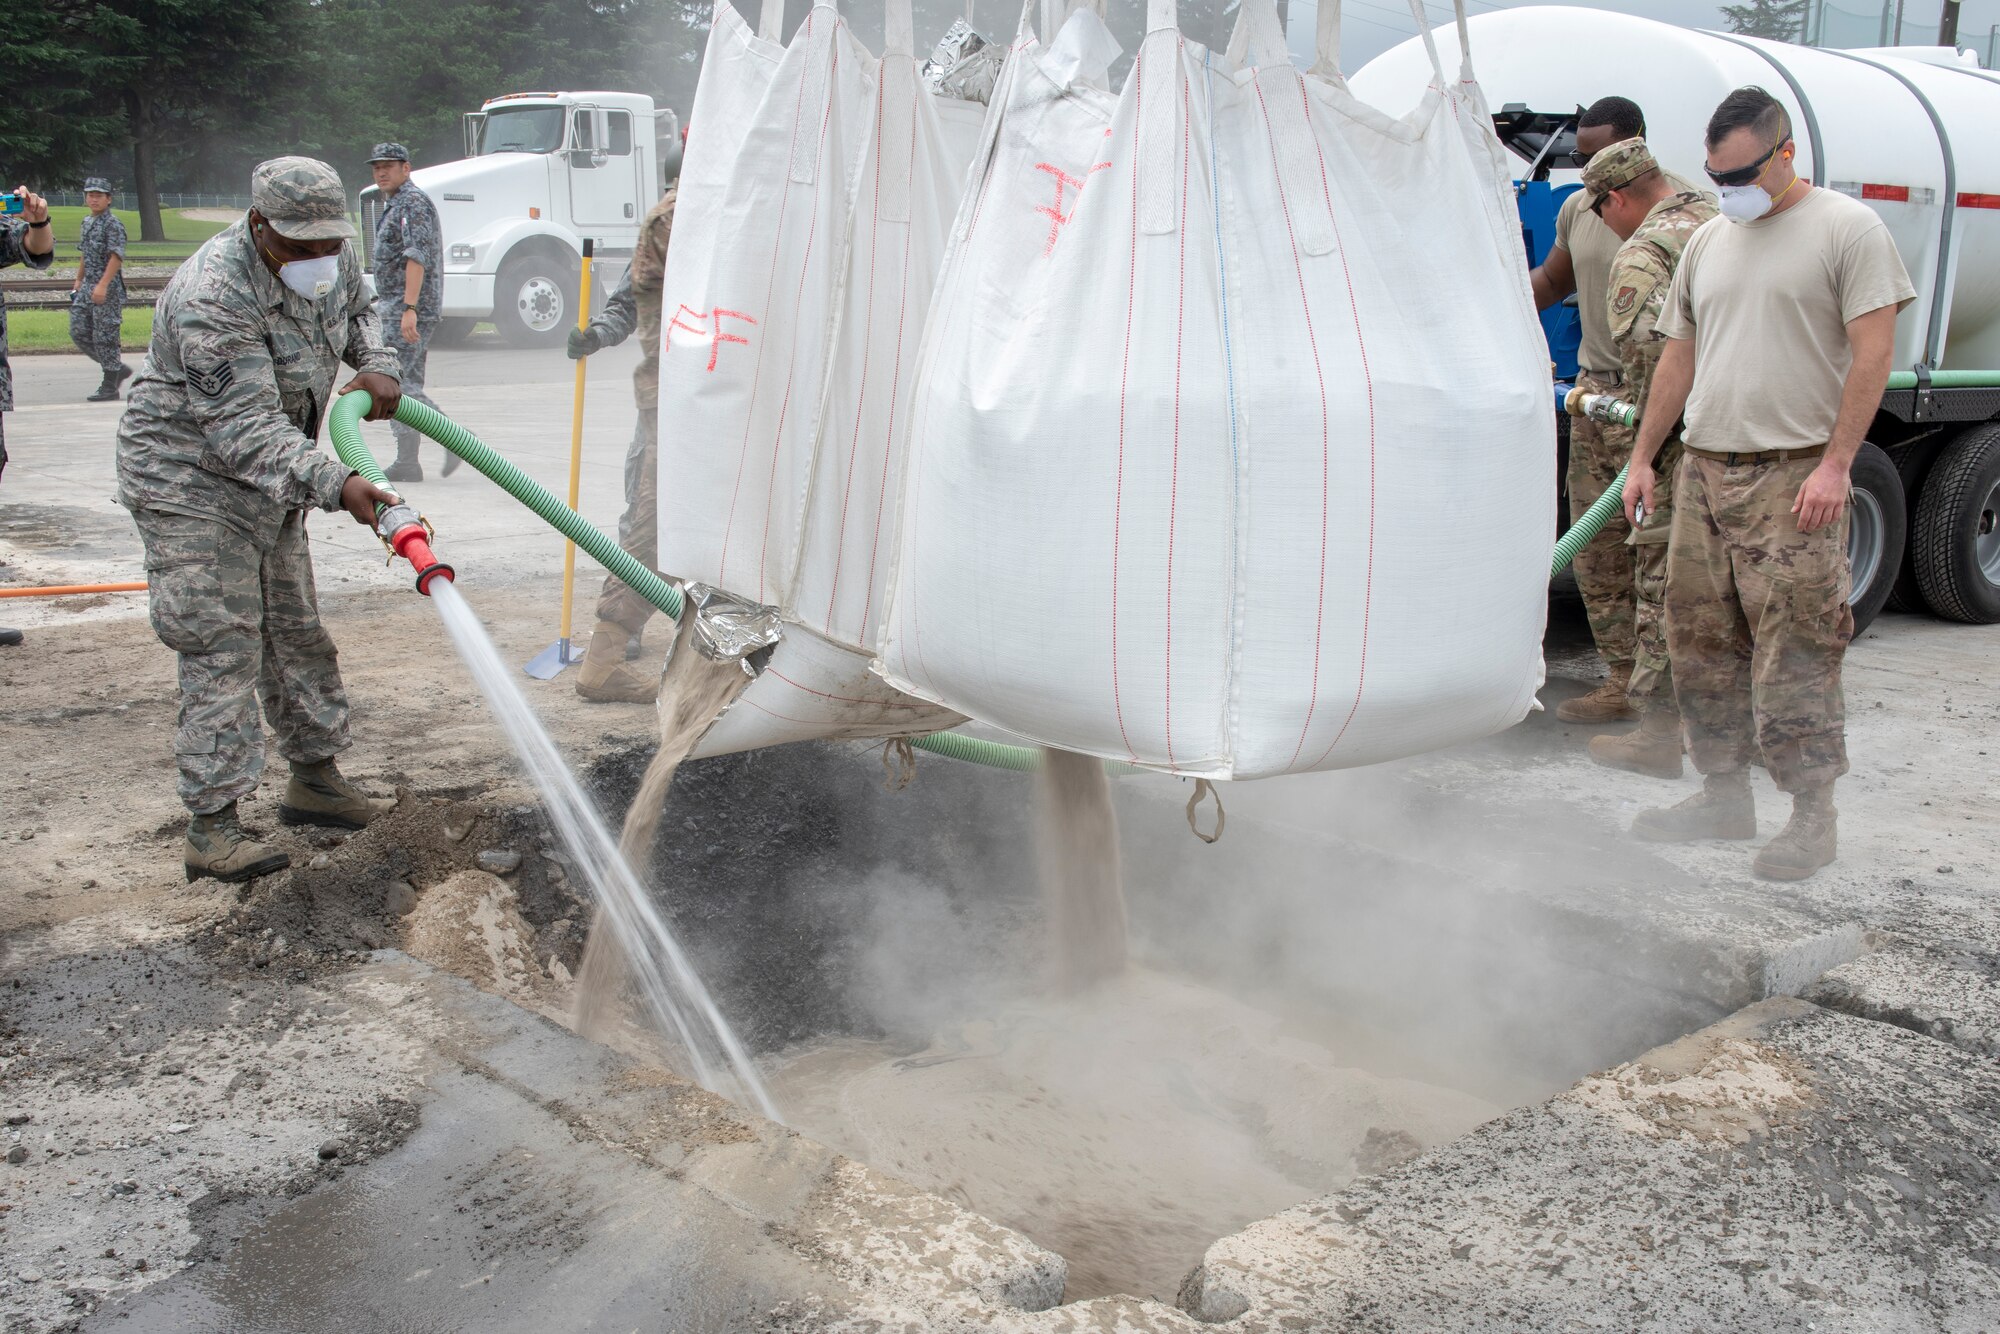 Civil Engineer Airmen mix water with flow able fill rapid set concrete to complete the backfill portion of rapid airfield damage repair (RADR) during Pacific Unity 2019 at Yokota Air Base, Japan, August 22, 2019.